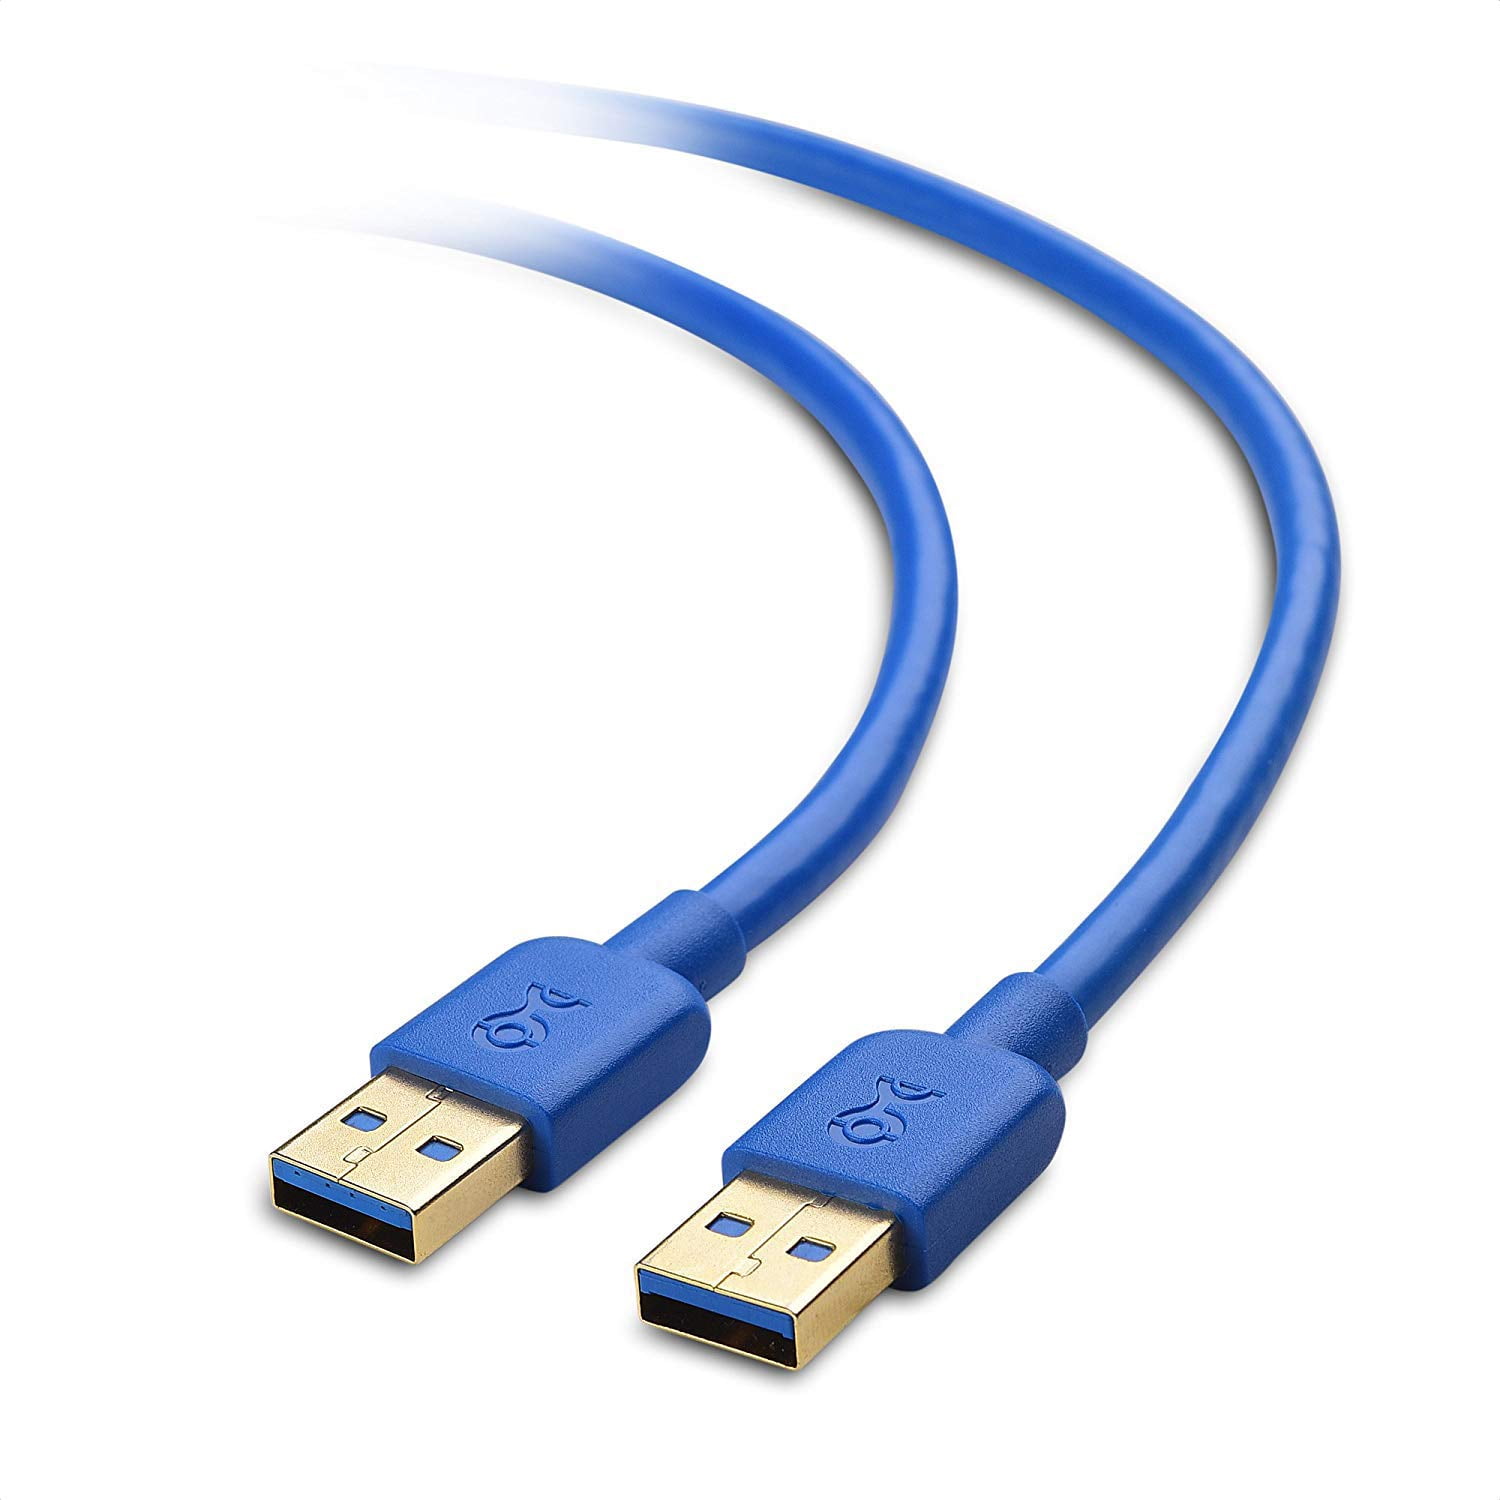 Cable Matters USB 3.0 Cable (USB to USB Cable Male to Male) in Blue 10 Feet - image 1 of 4